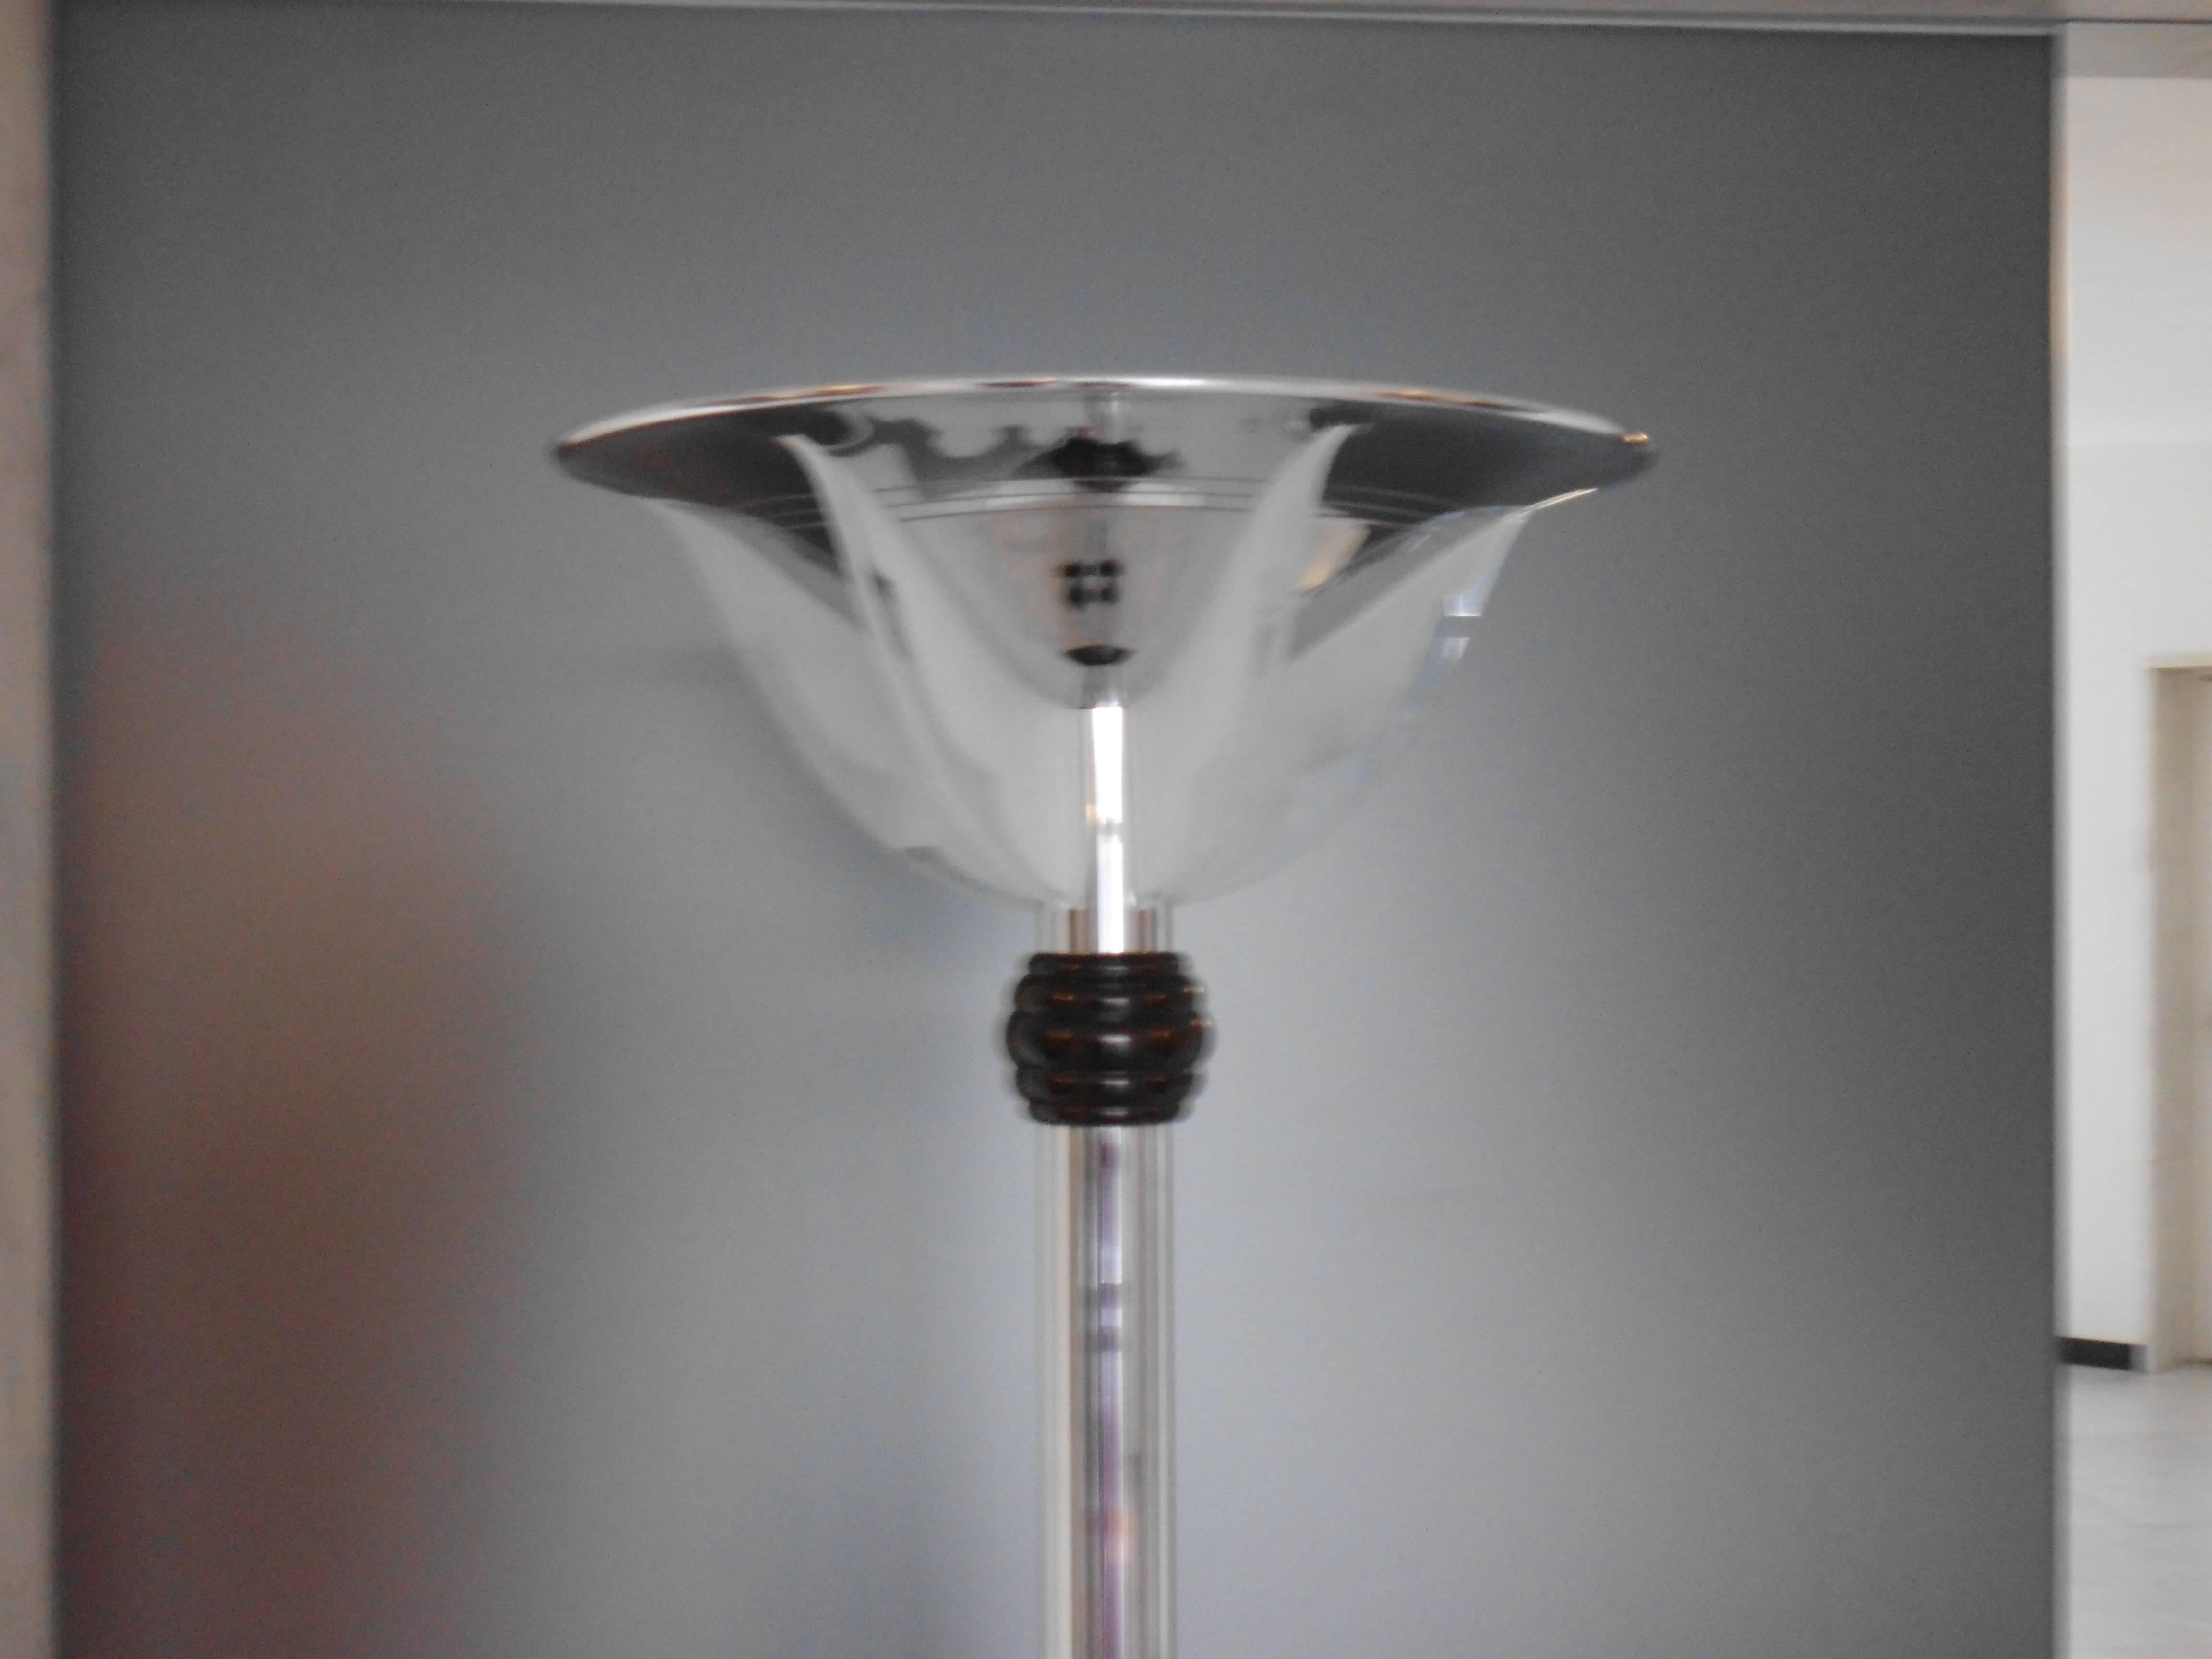 Art Deco floor lamp black and chrome with white wings.